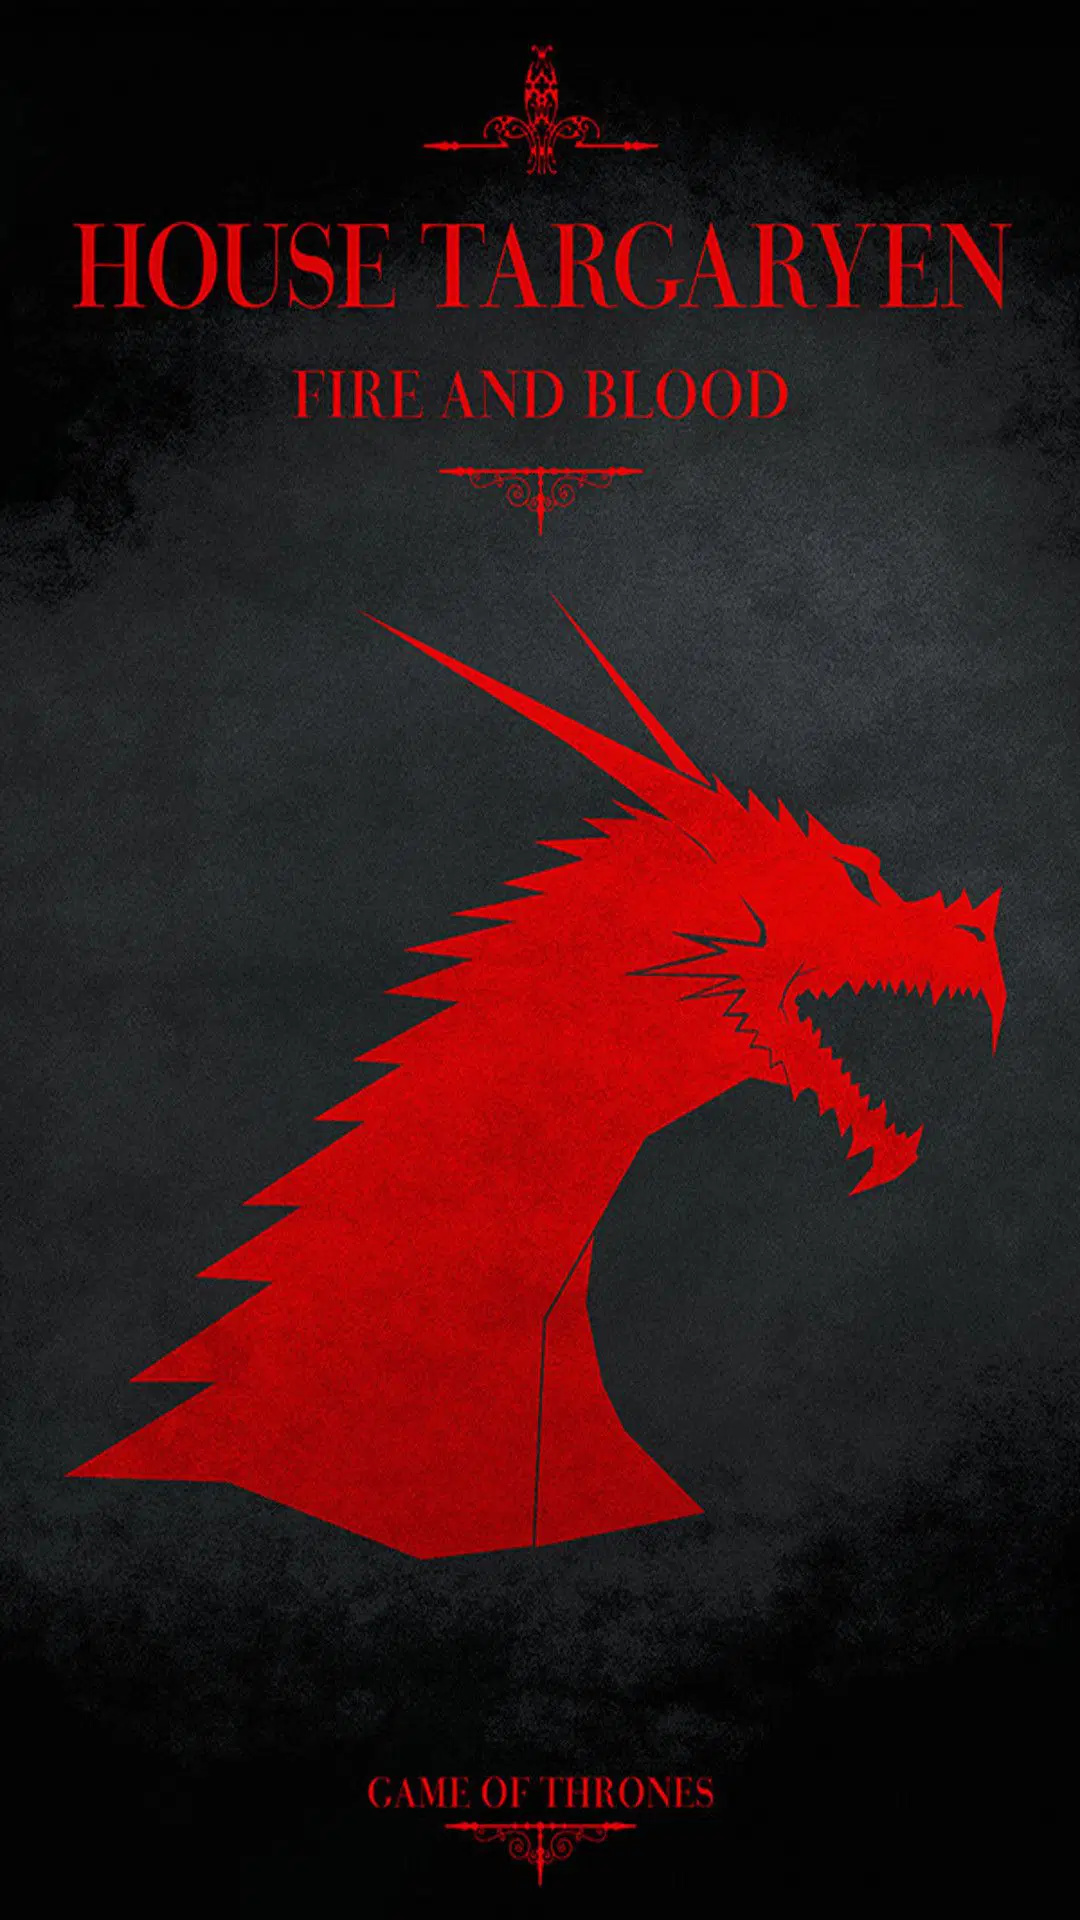 HD backgrounds, Android wallpaper, House Targaryen, 1080p and 4K wallpapers, 1080x1920 Full HD Phone